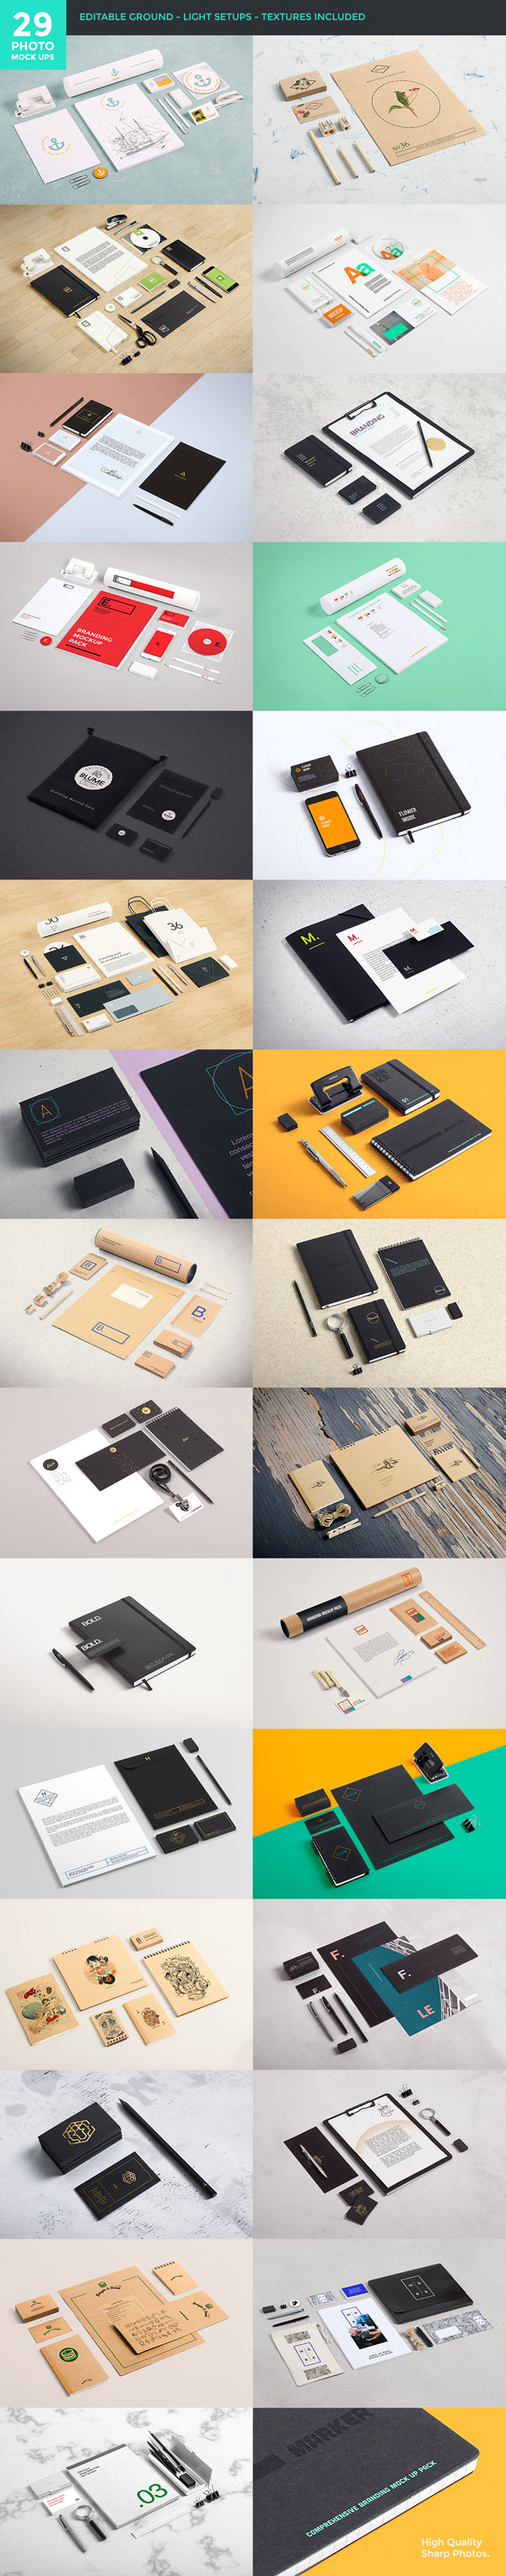 The 29 photo mockups with editable backgrounds, light setups, and included textures.